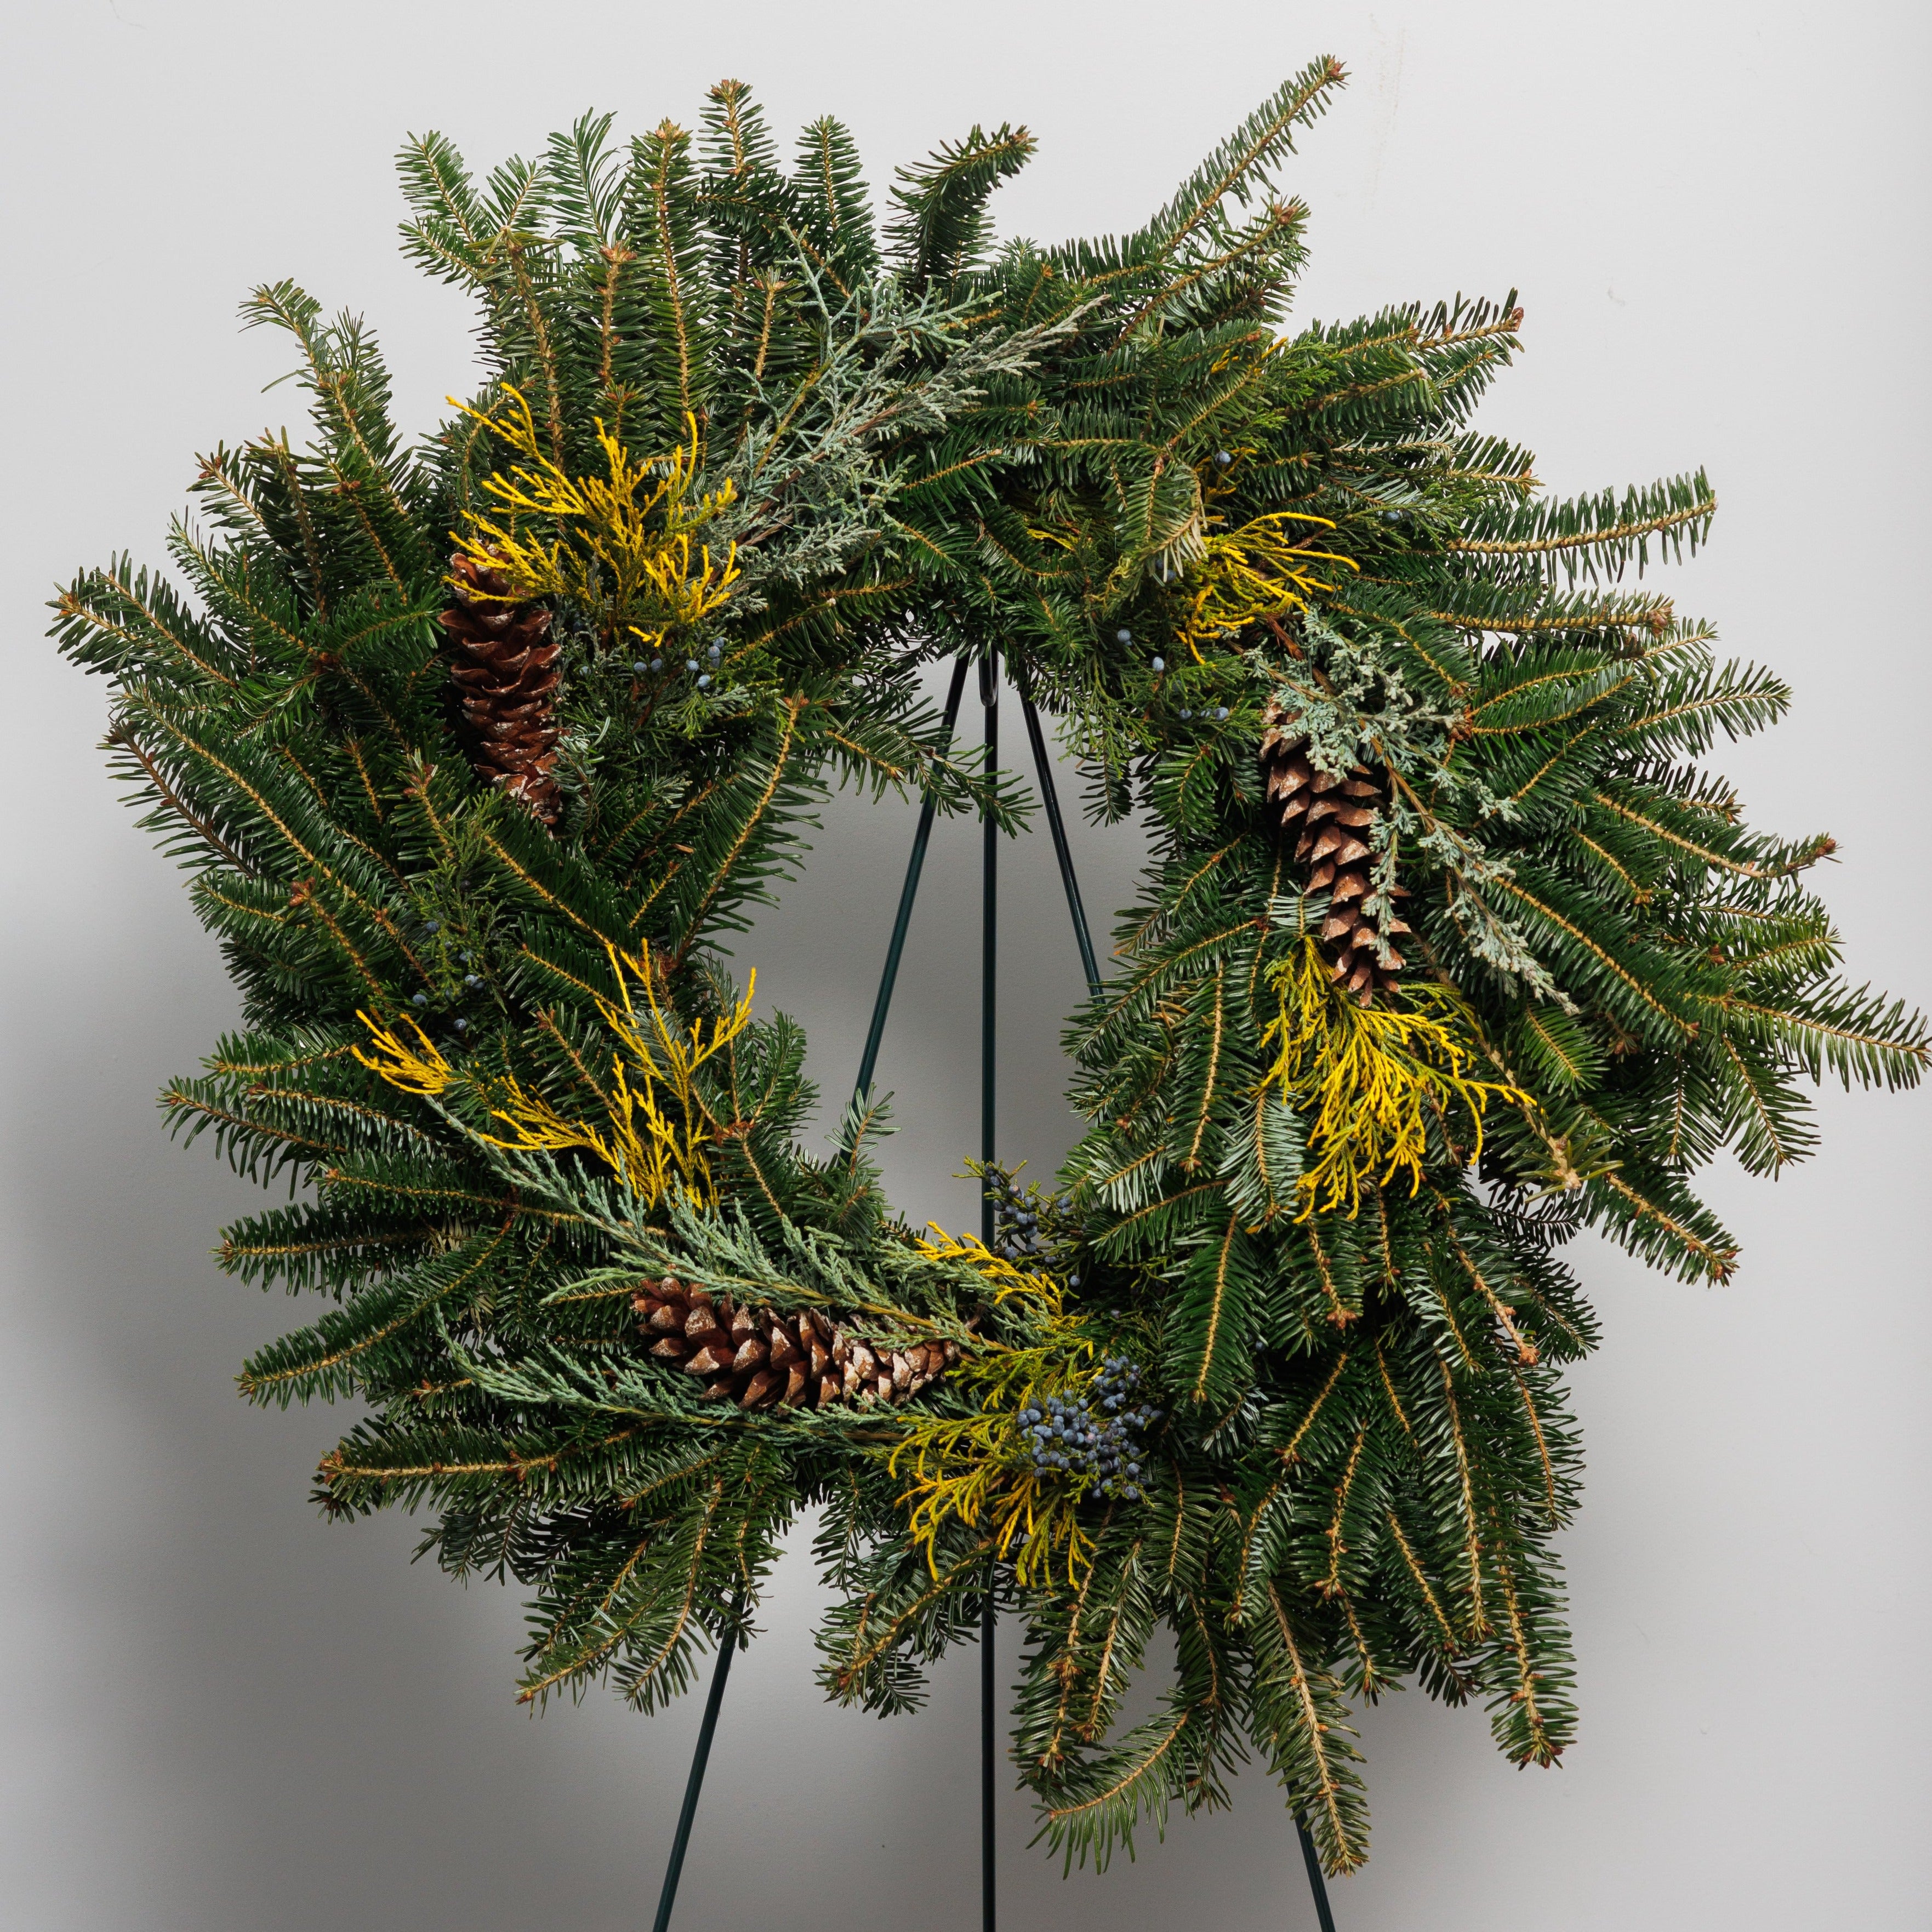 A mixed greens wreath with berries and cones.